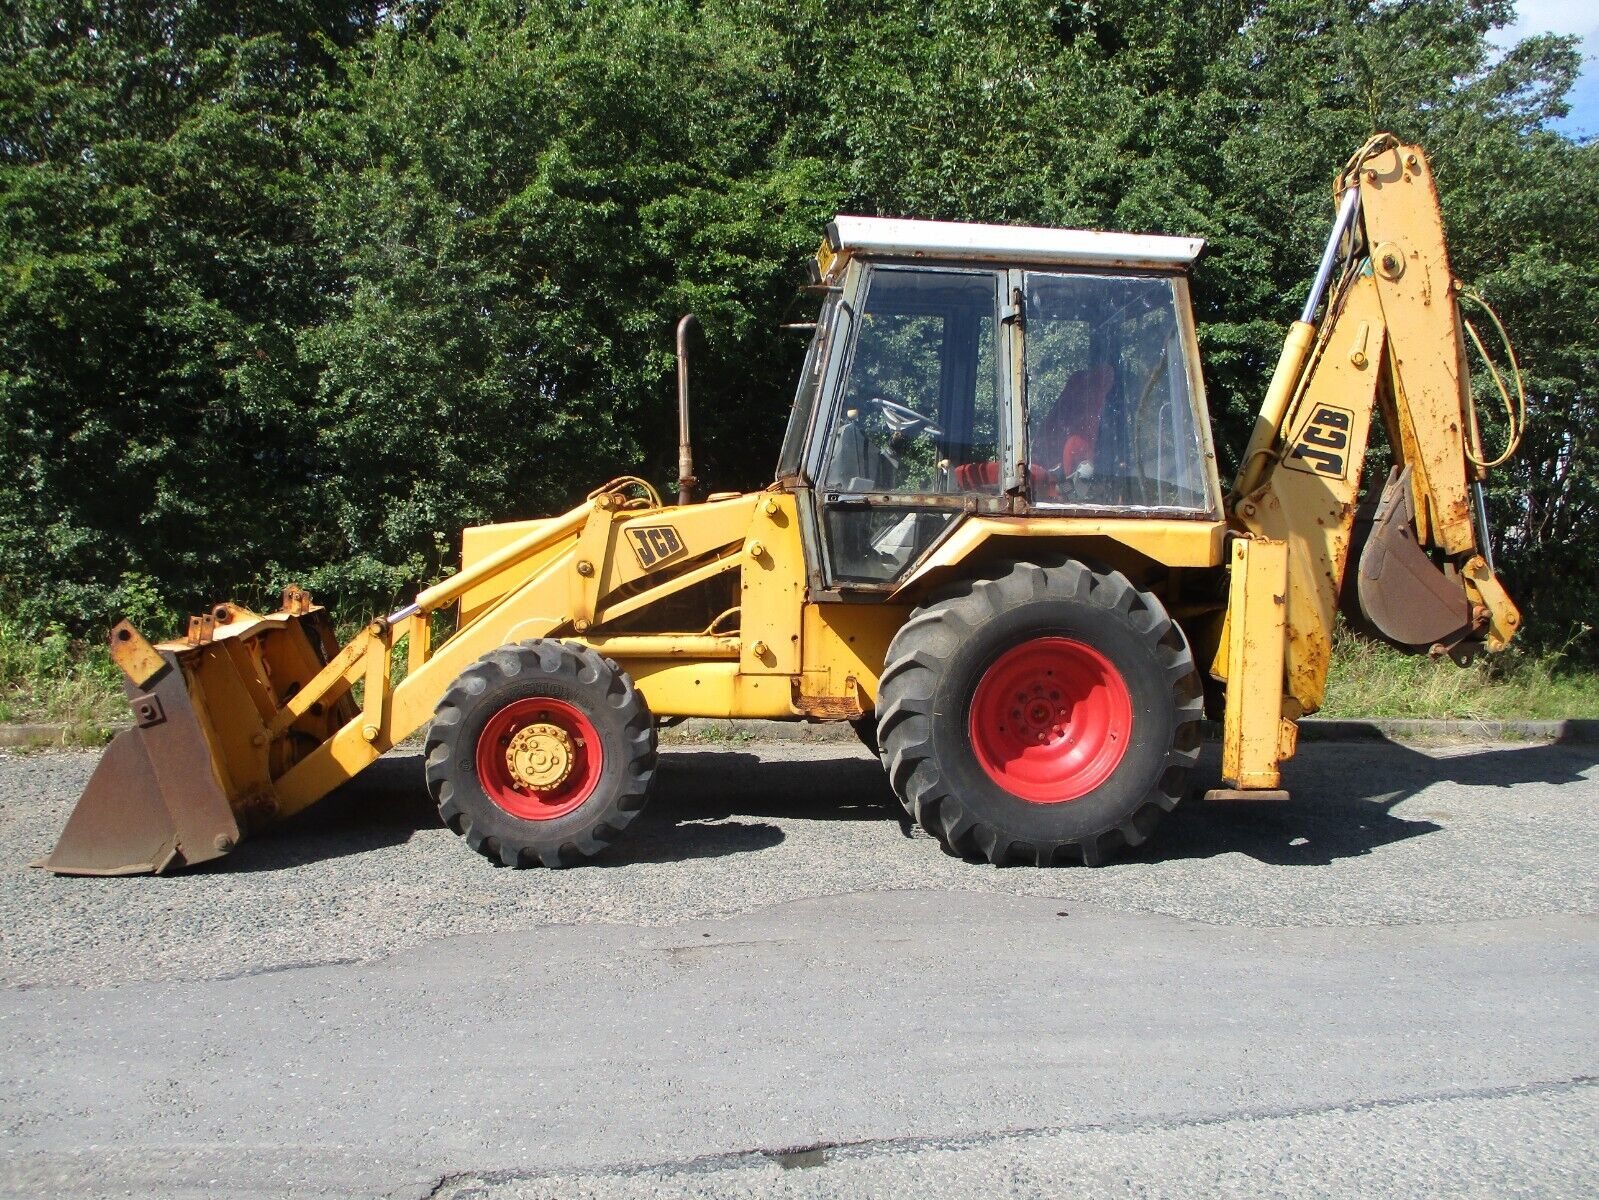 Bid on JCB 3CX: THE ULTIMATE 4X4 LOADER AND DIGGER- Buy &amp; Sell on Auction with EAMA Group